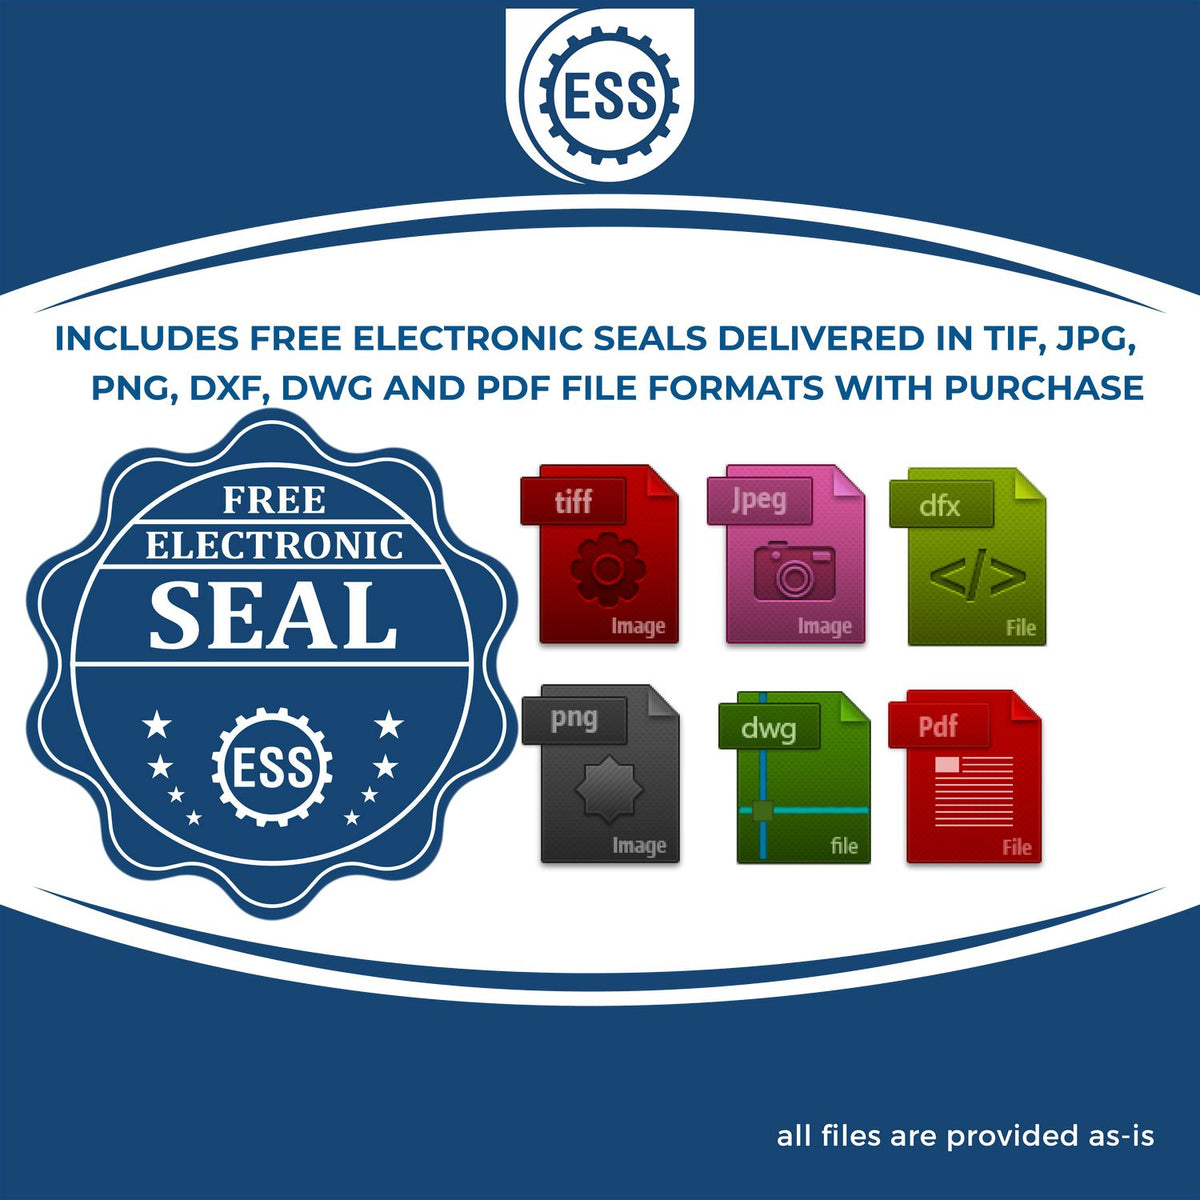 An infographic for the free electronic seal for the Gift Oklahoma Geologist Seal illustrating the different file type icons such as DXF, DWG, TIF, JPG and PNG.